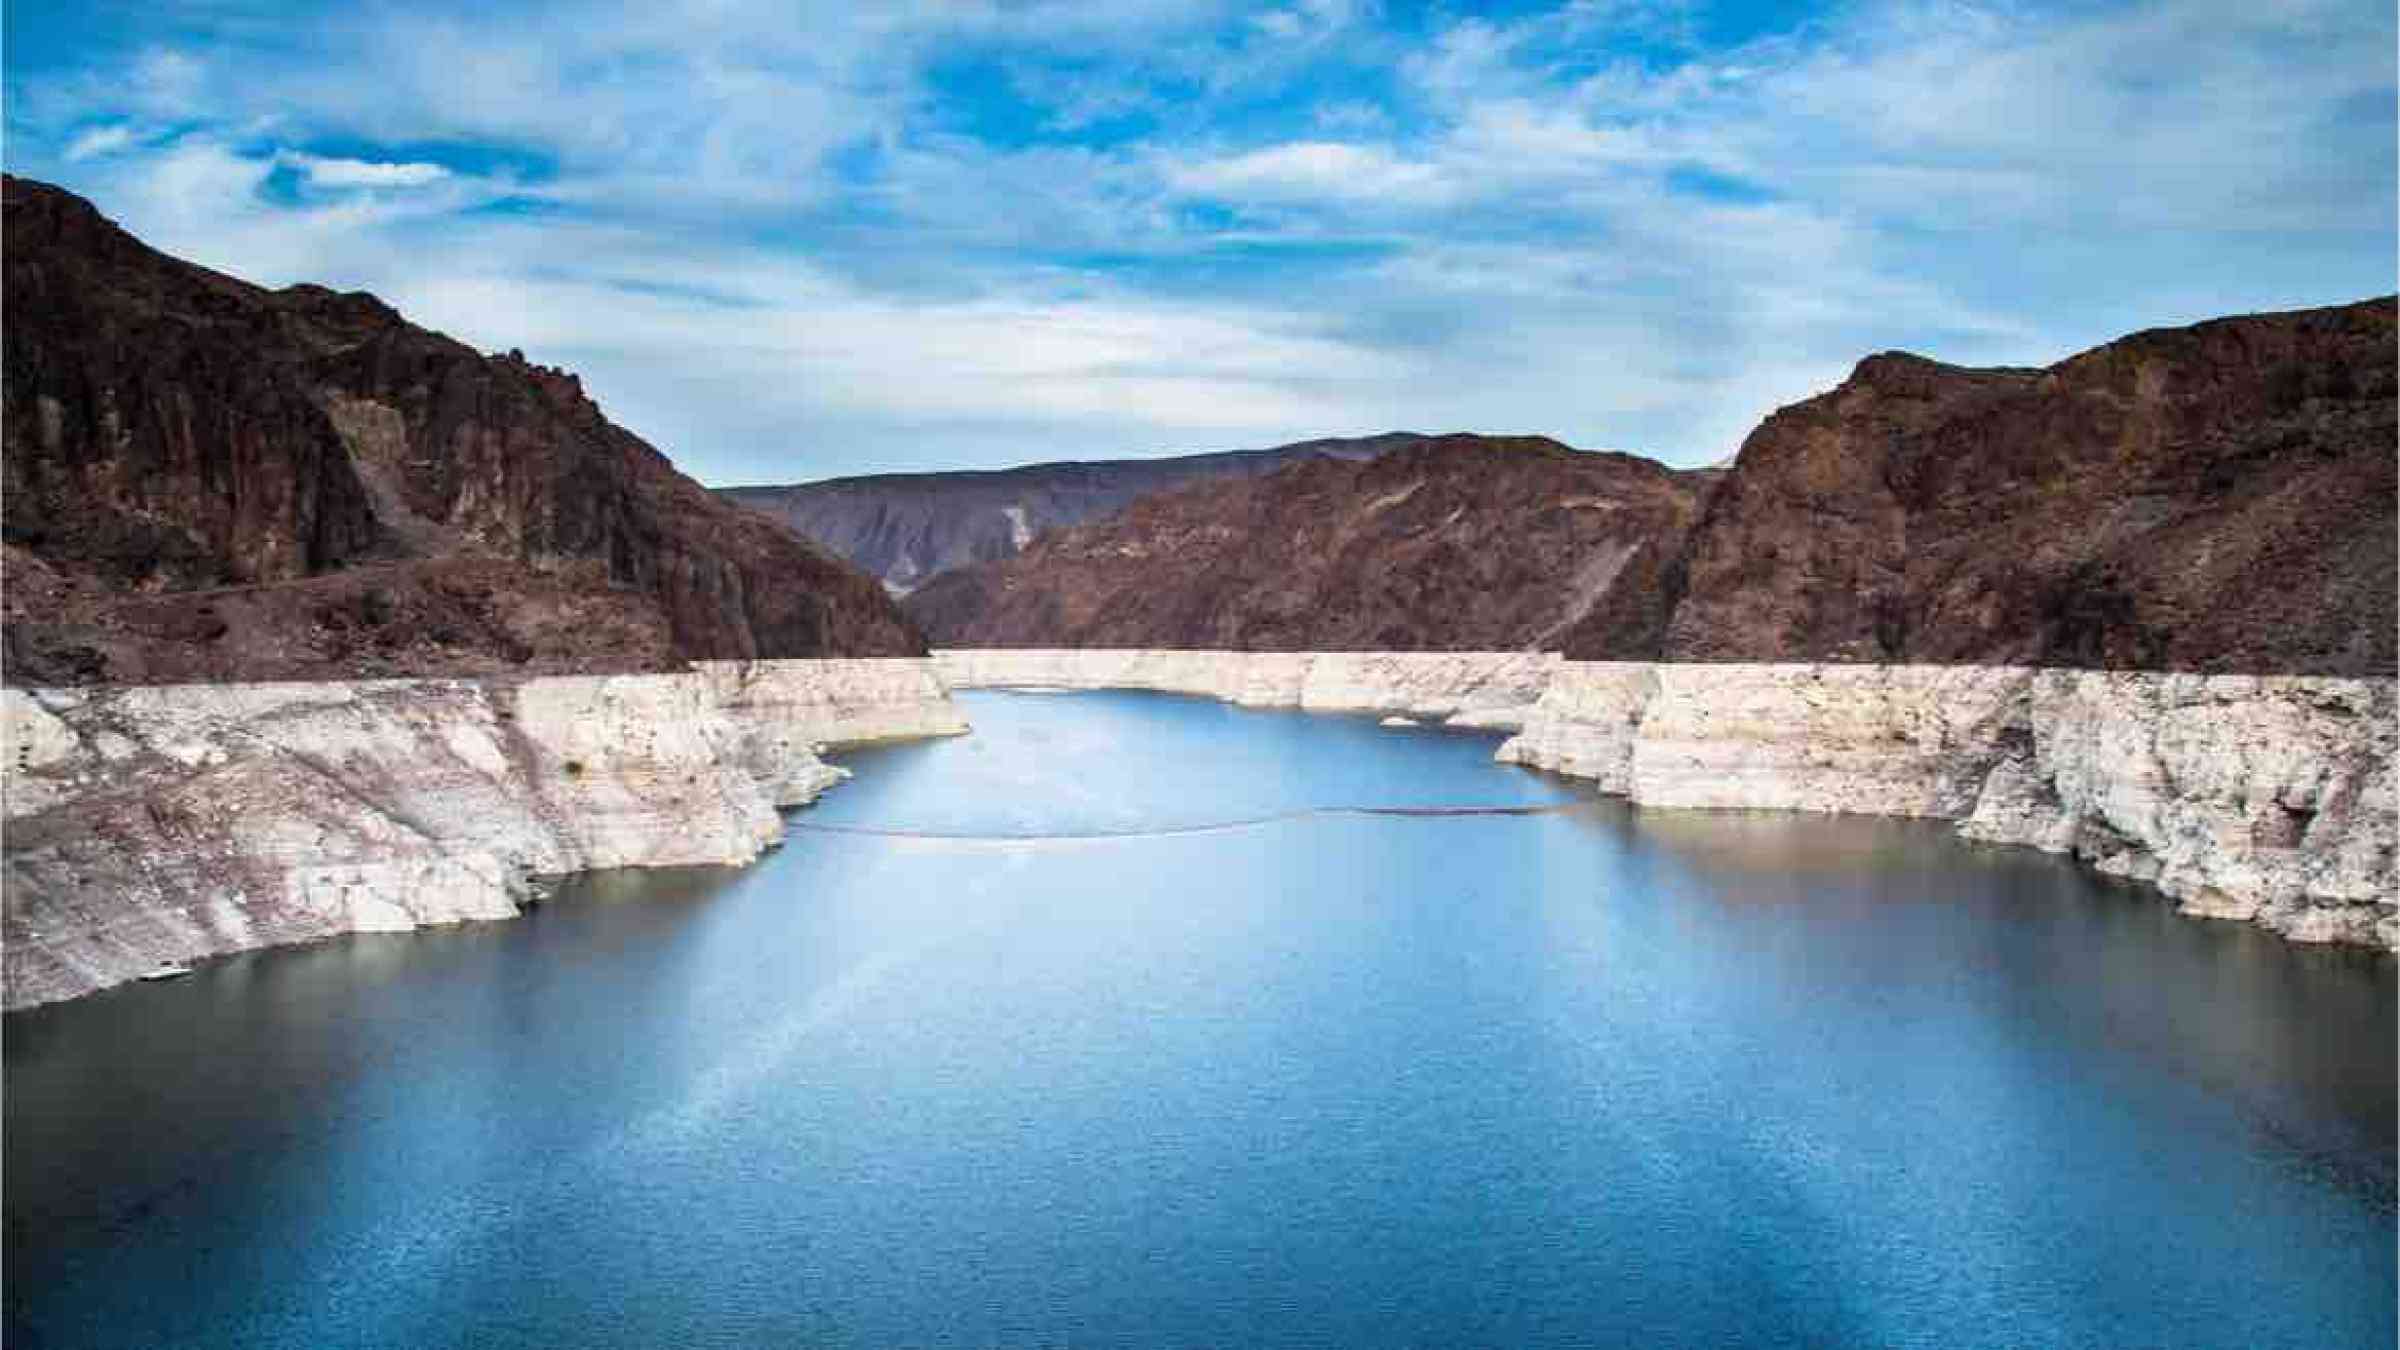 Hoover Dam and Lake Meads area, weathering of the surrounding slopes due to sinking water line